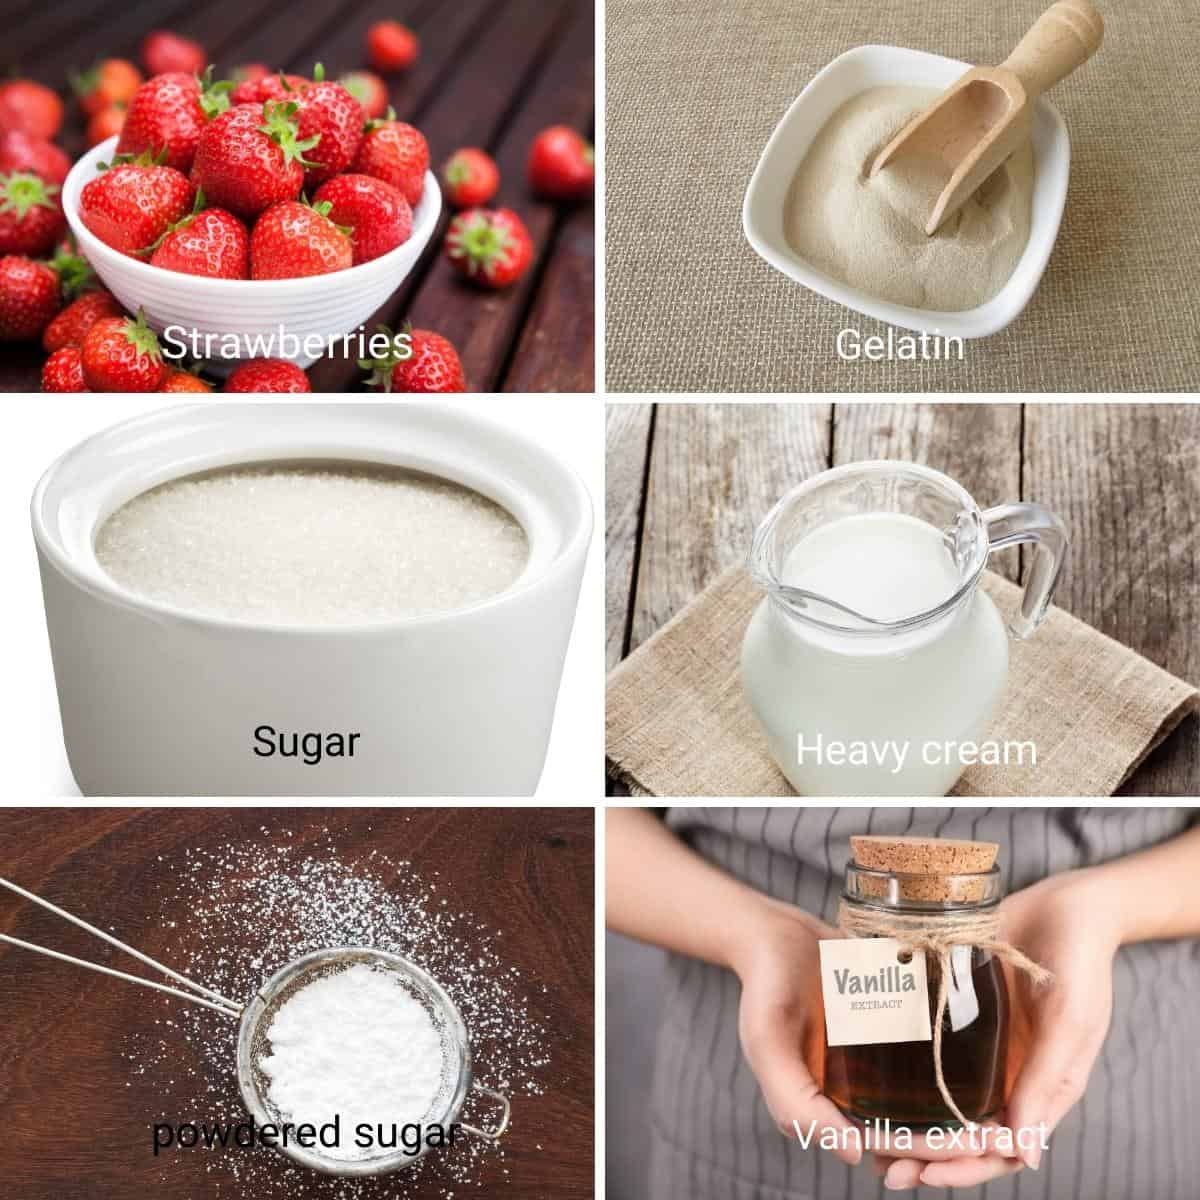 Ingredients for making strawberry mousse.